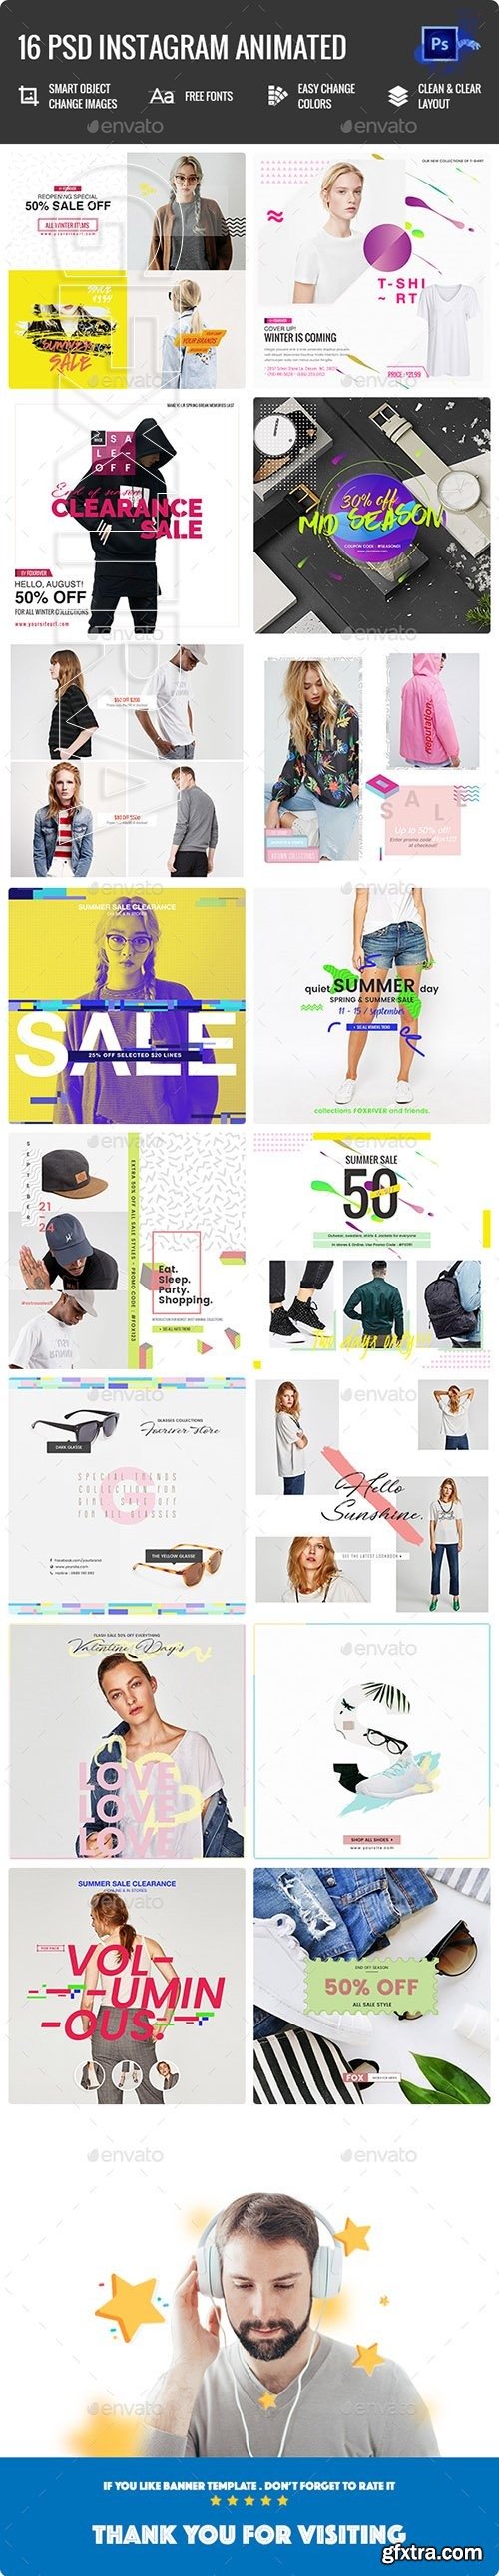 GraphicRiver - Fashion Instagram Animated Posts - 16 PSD 22540854